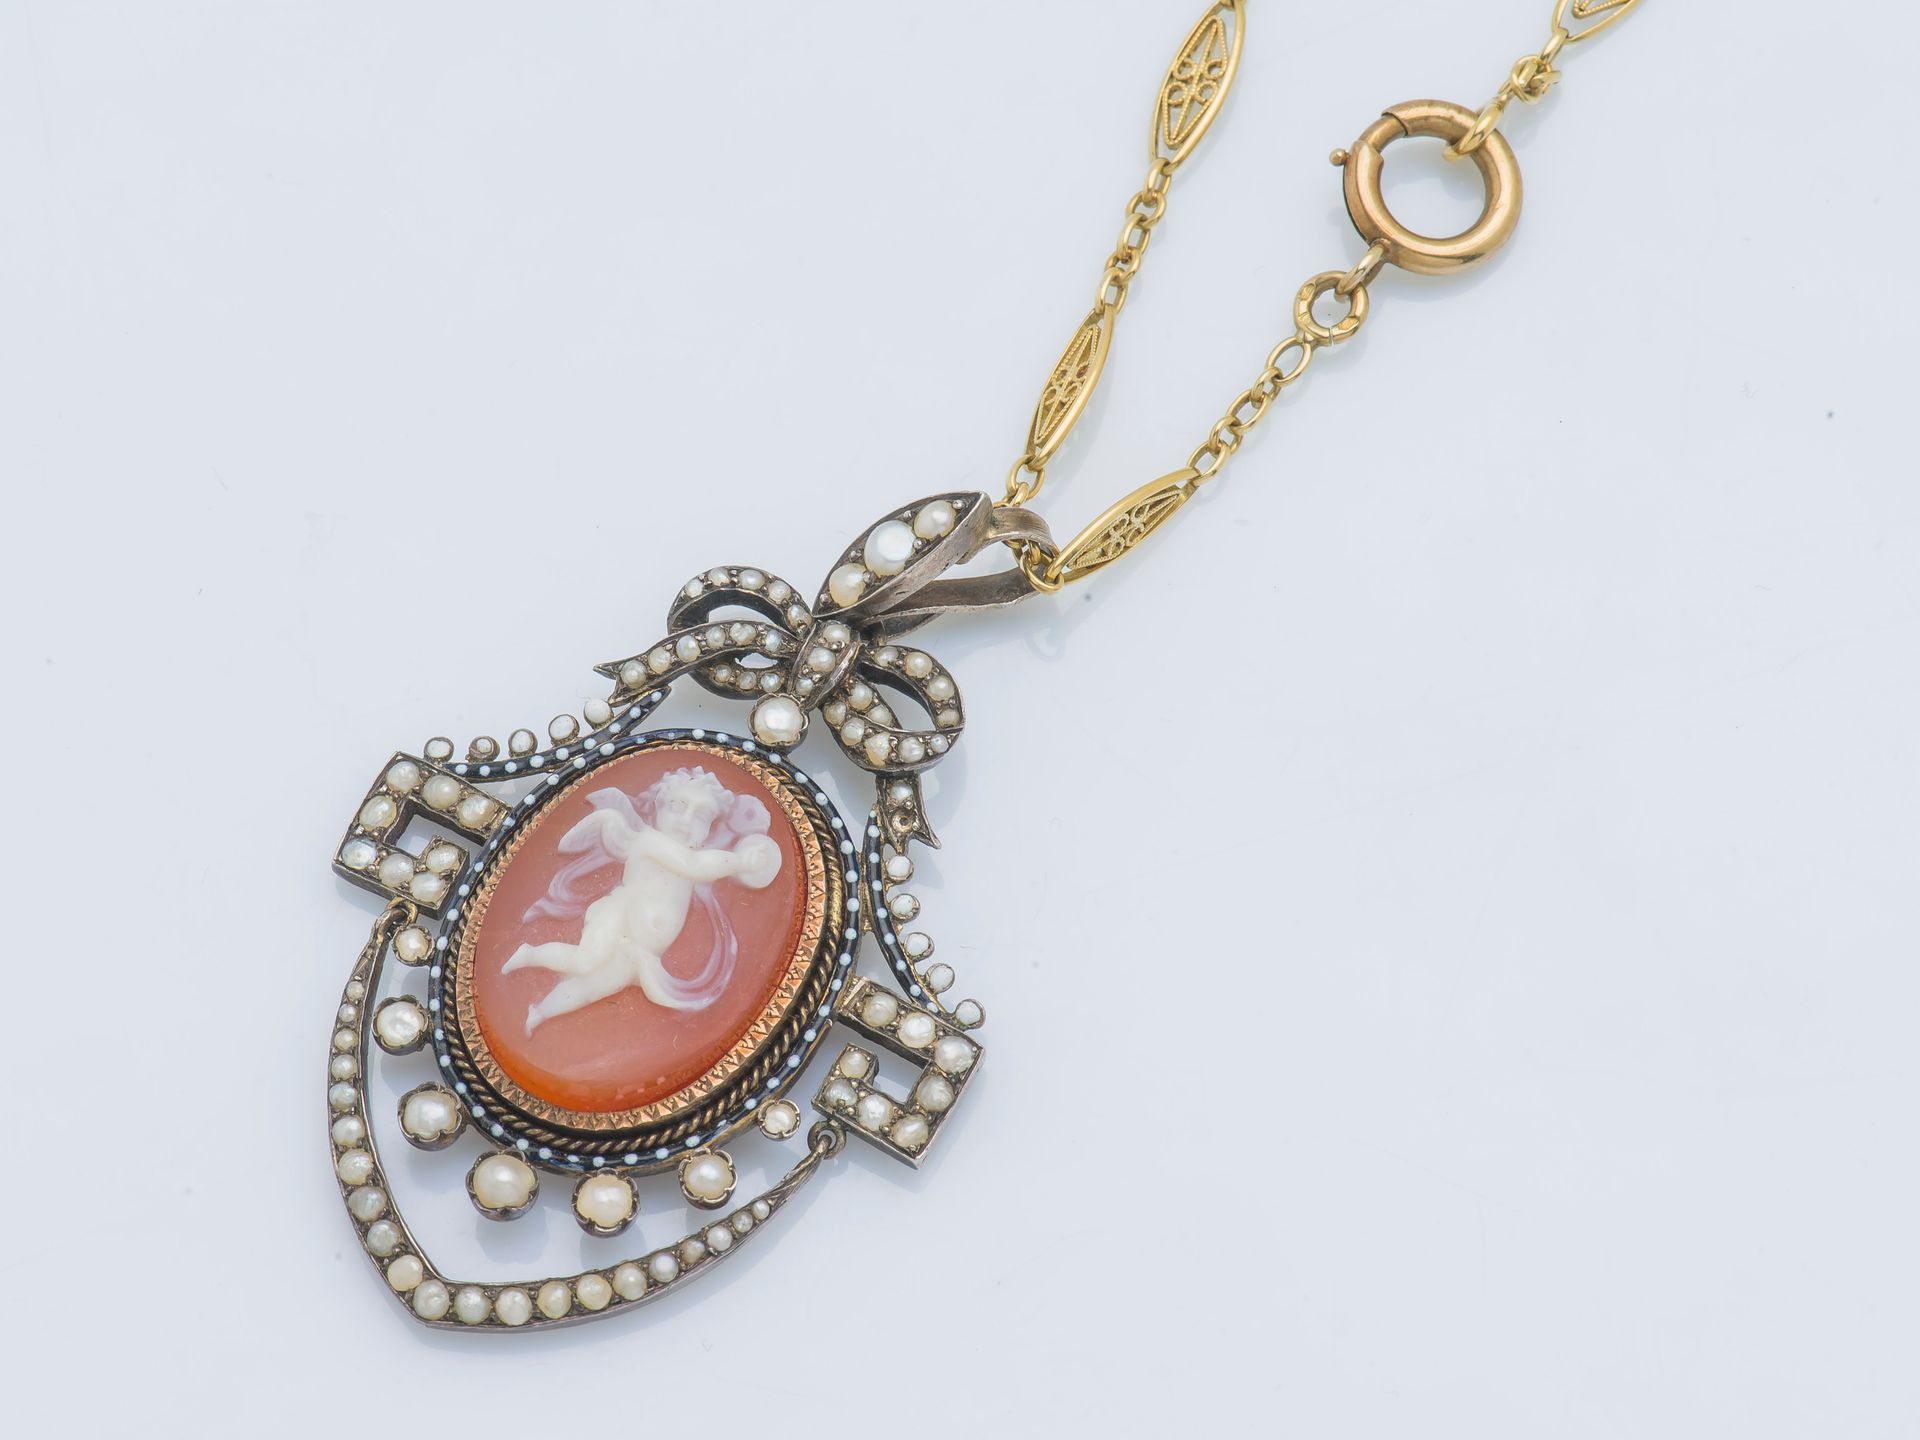 Null Silver pendant (800 ‰) of baluster form adorned with a cameo on cornelian f&hellip;